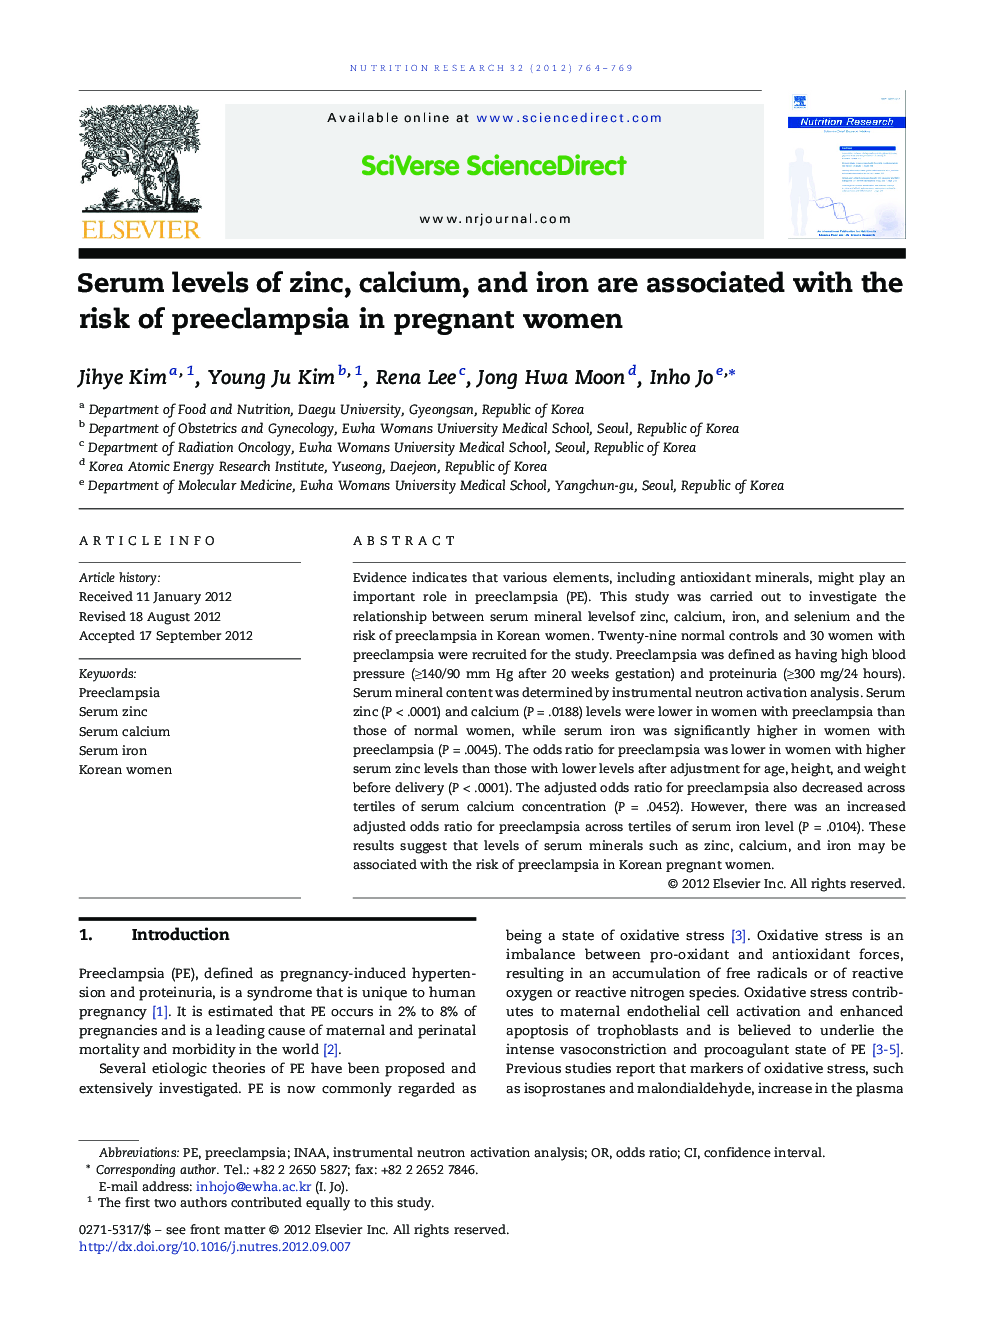 Serum levels of zinc, calcium, and iron are associated with the risk of preeclampsia in pregnant women